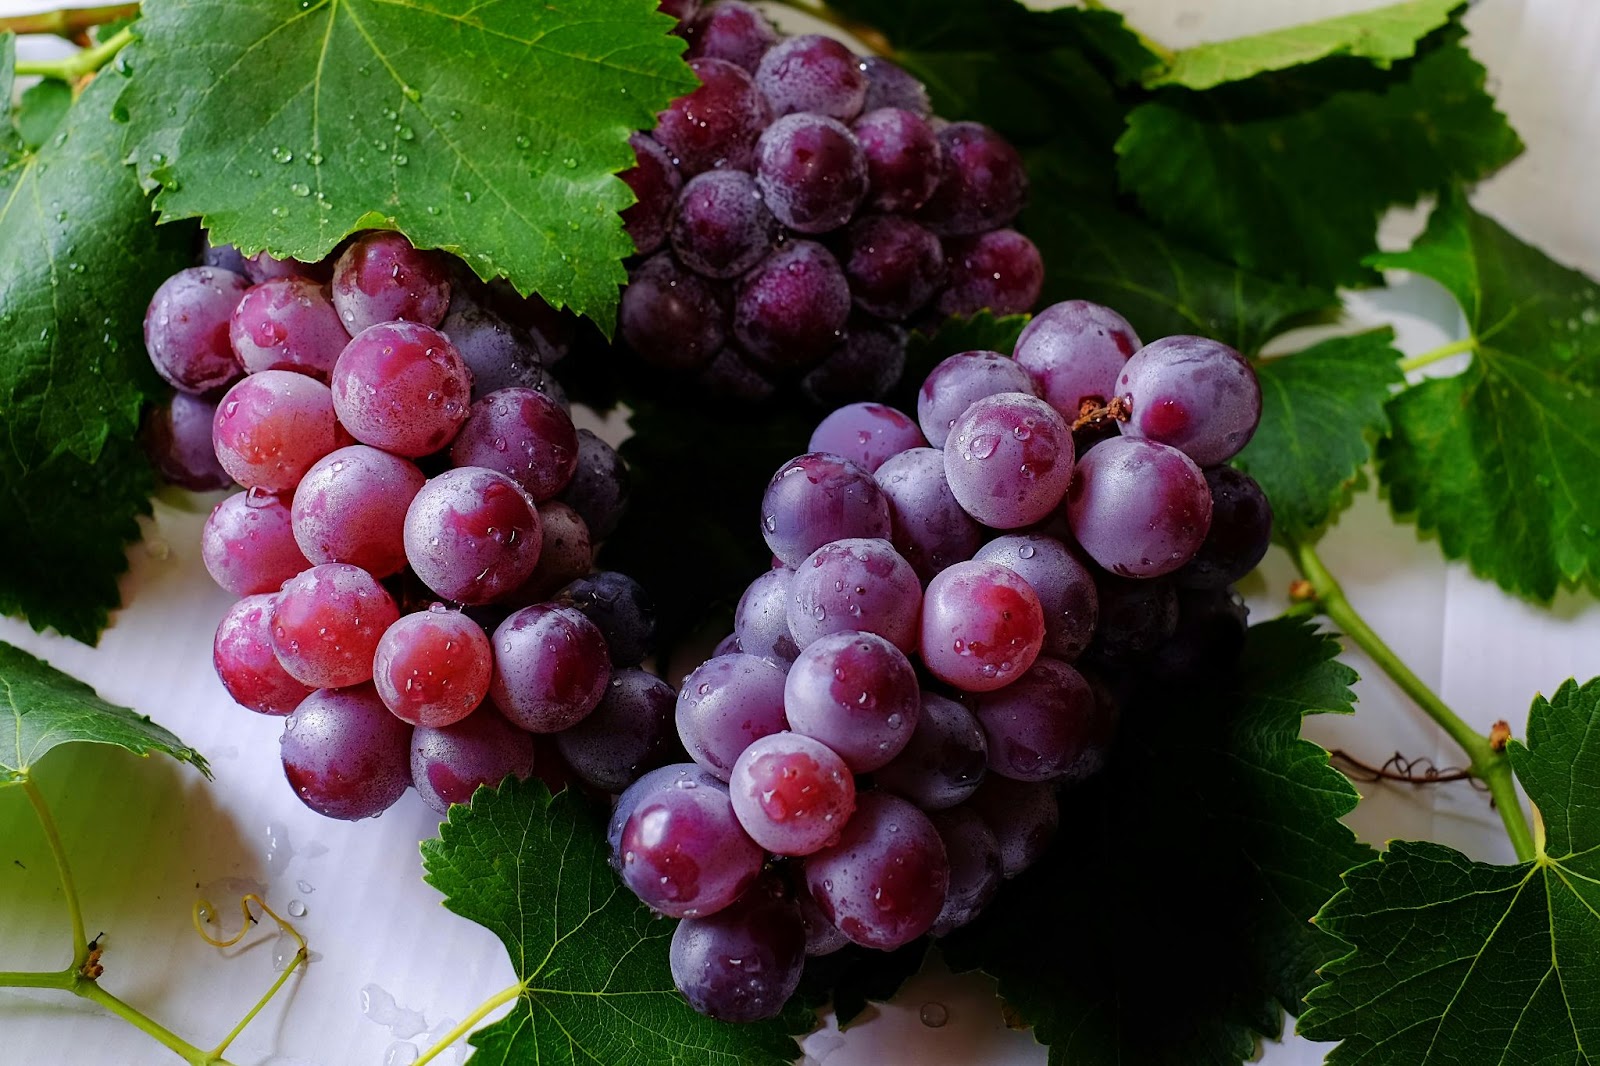 grapes are great for people, but poisonous to dogs